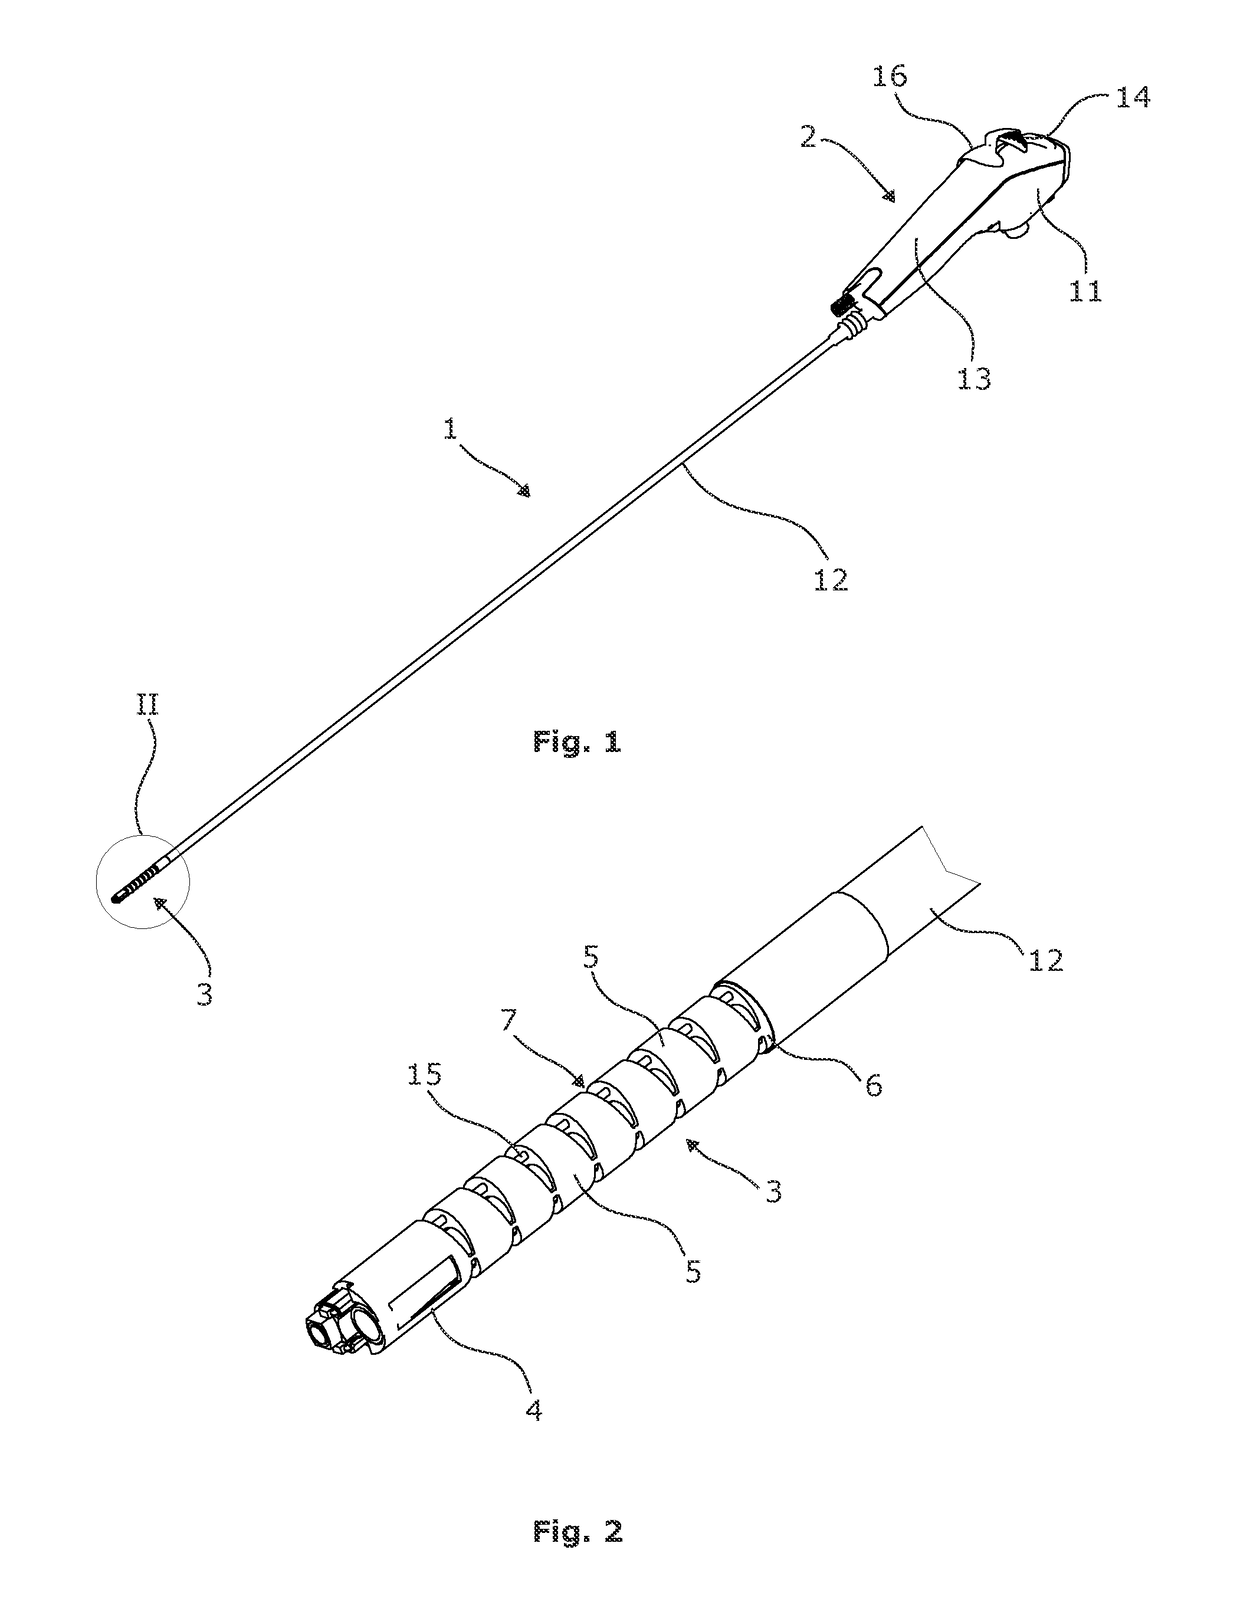 Apparatus for maintaining a tensioned pull-wire in an endoscope